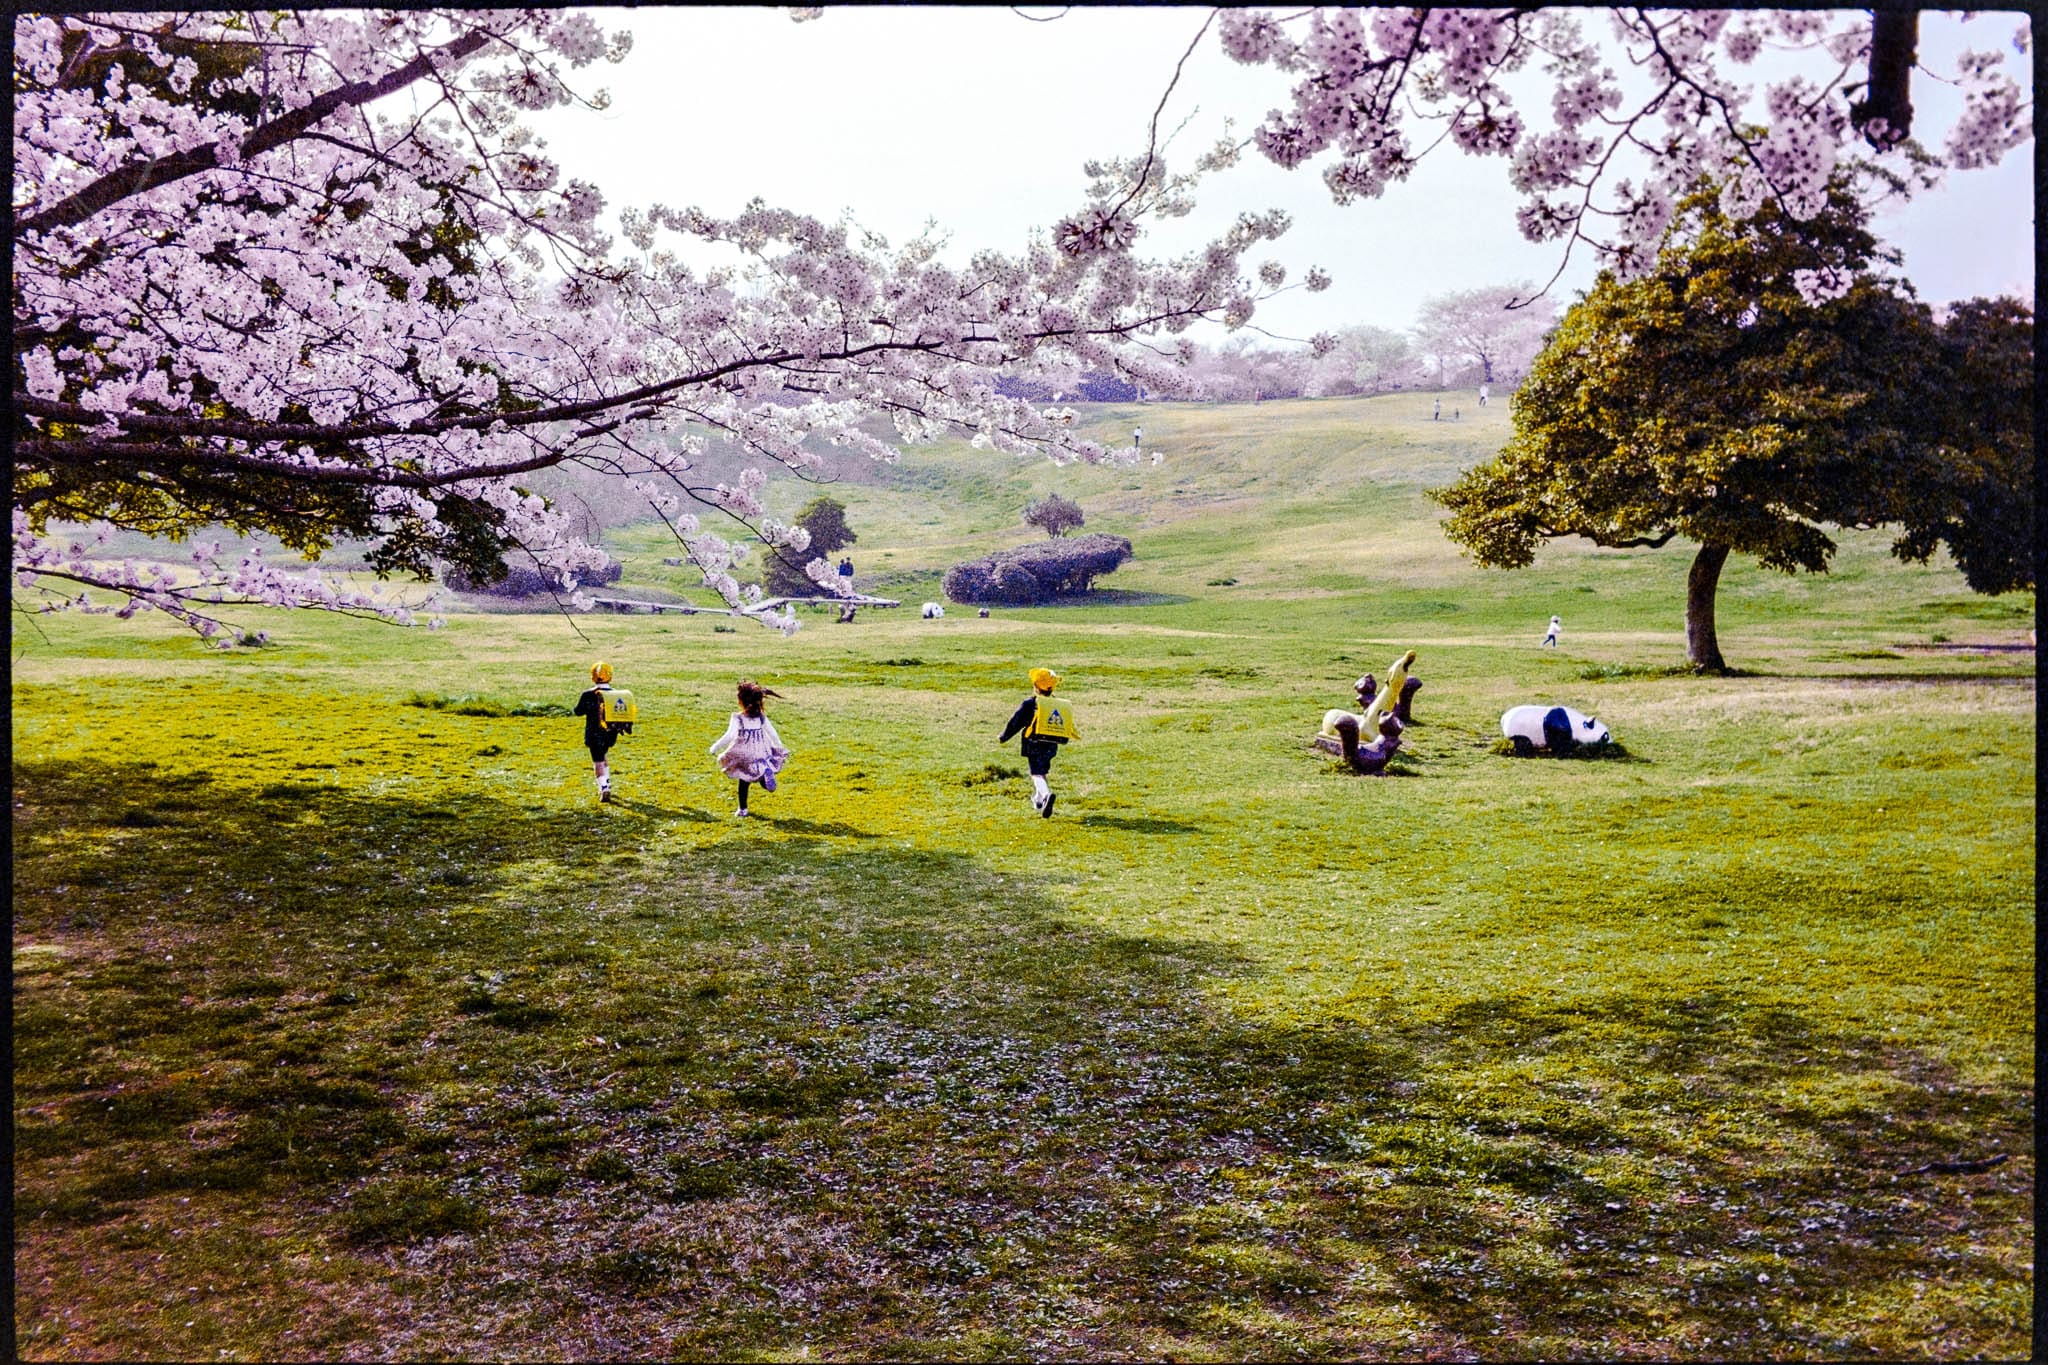 Children playing on a vibrant lawn under a blooming cherry blossom tree in springtime.